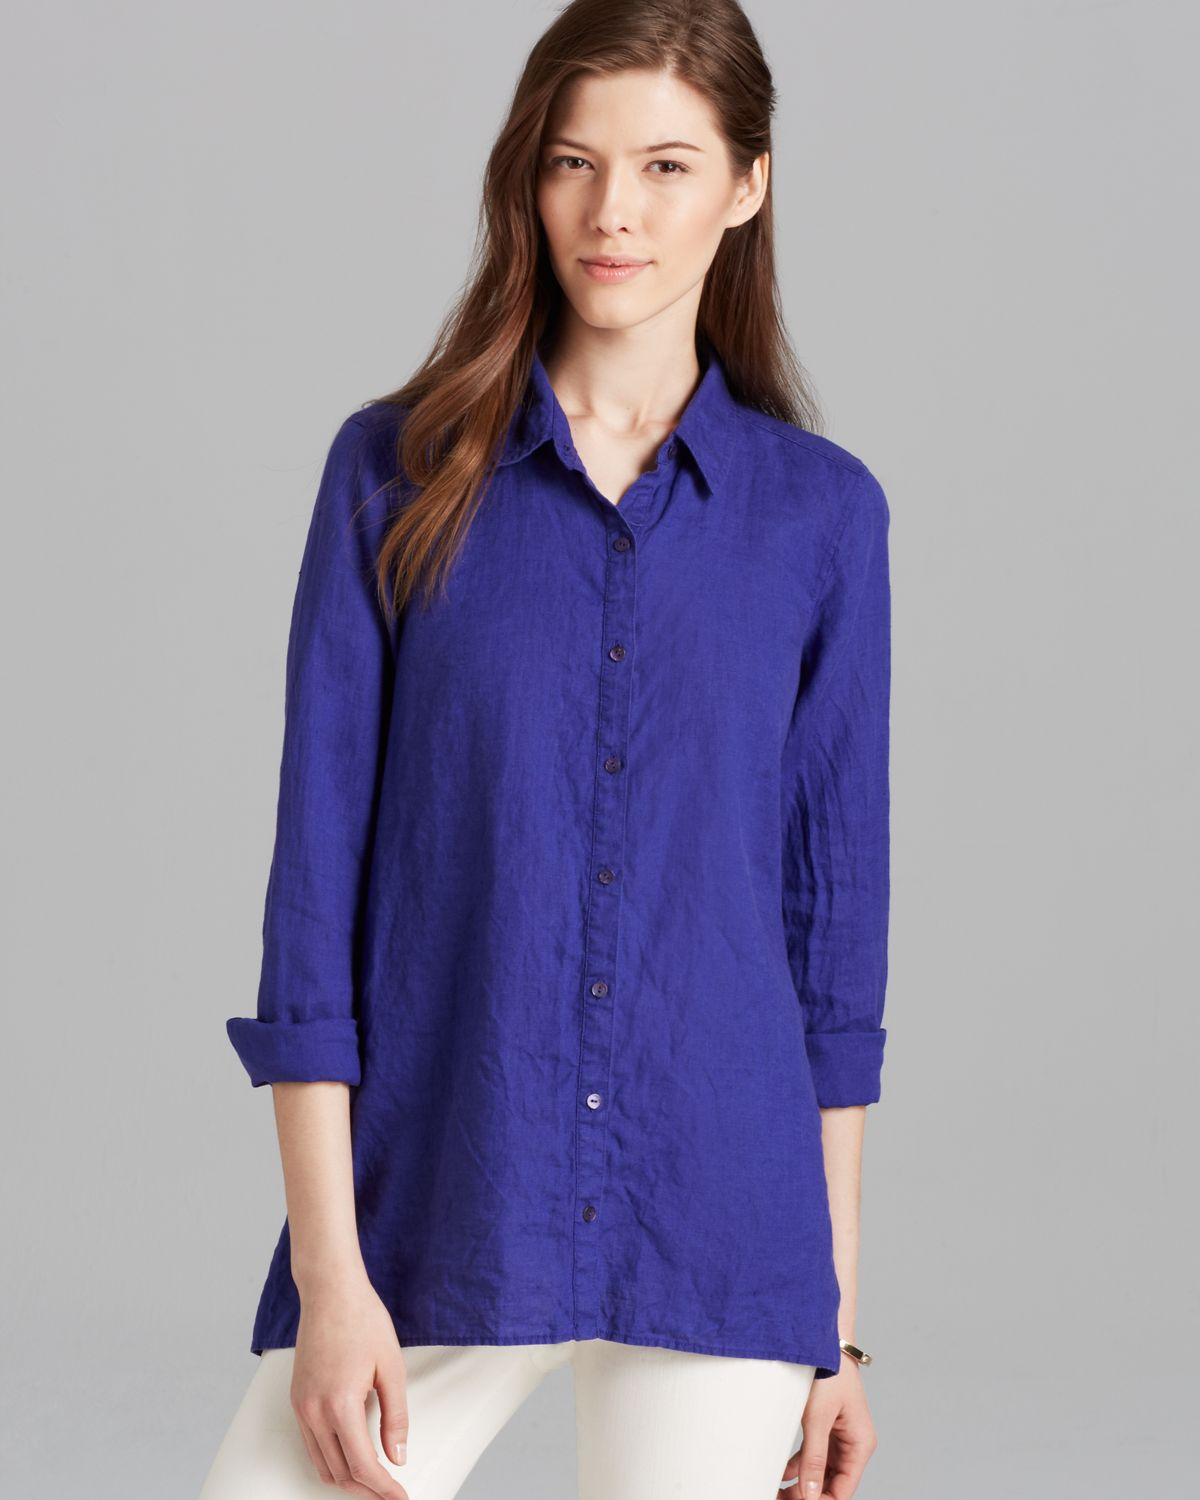 Lyst - Eileen Fisher Classic Collar Boxy Shirt in Blue